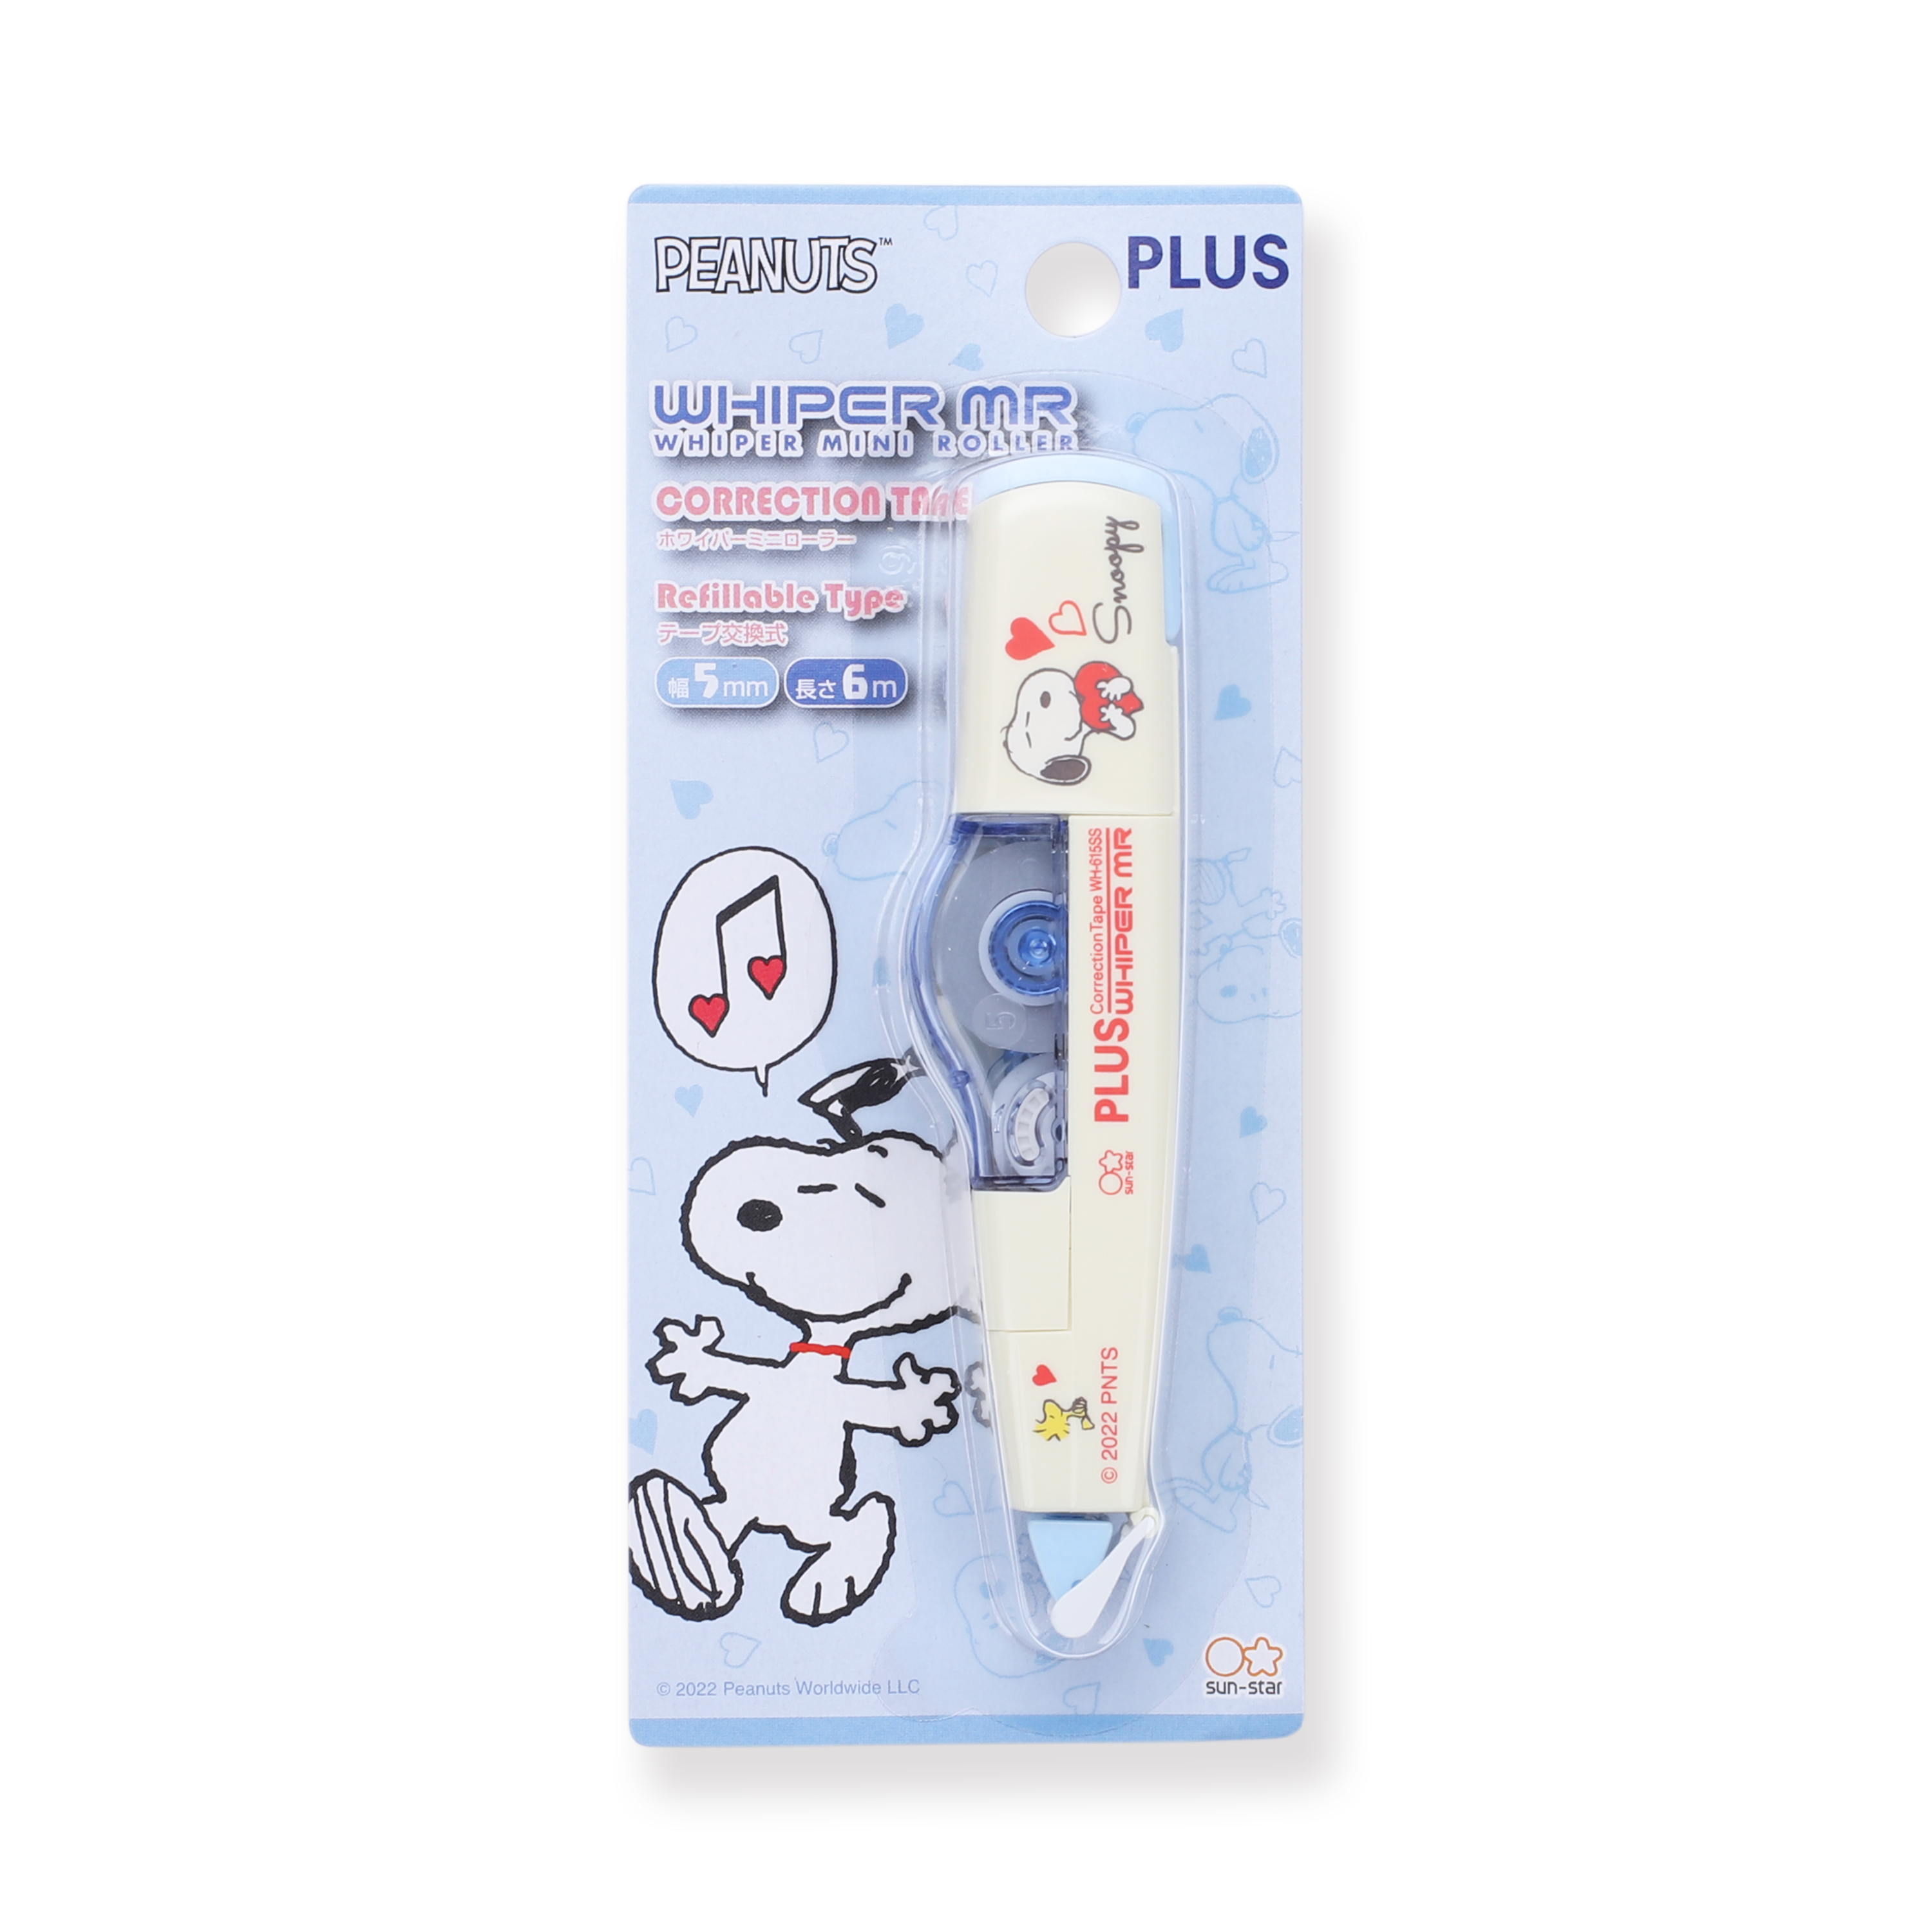 Plus Whiper MR Limited Edition Correction Tape - Snoopy - Heart Theme - Stationery Pal